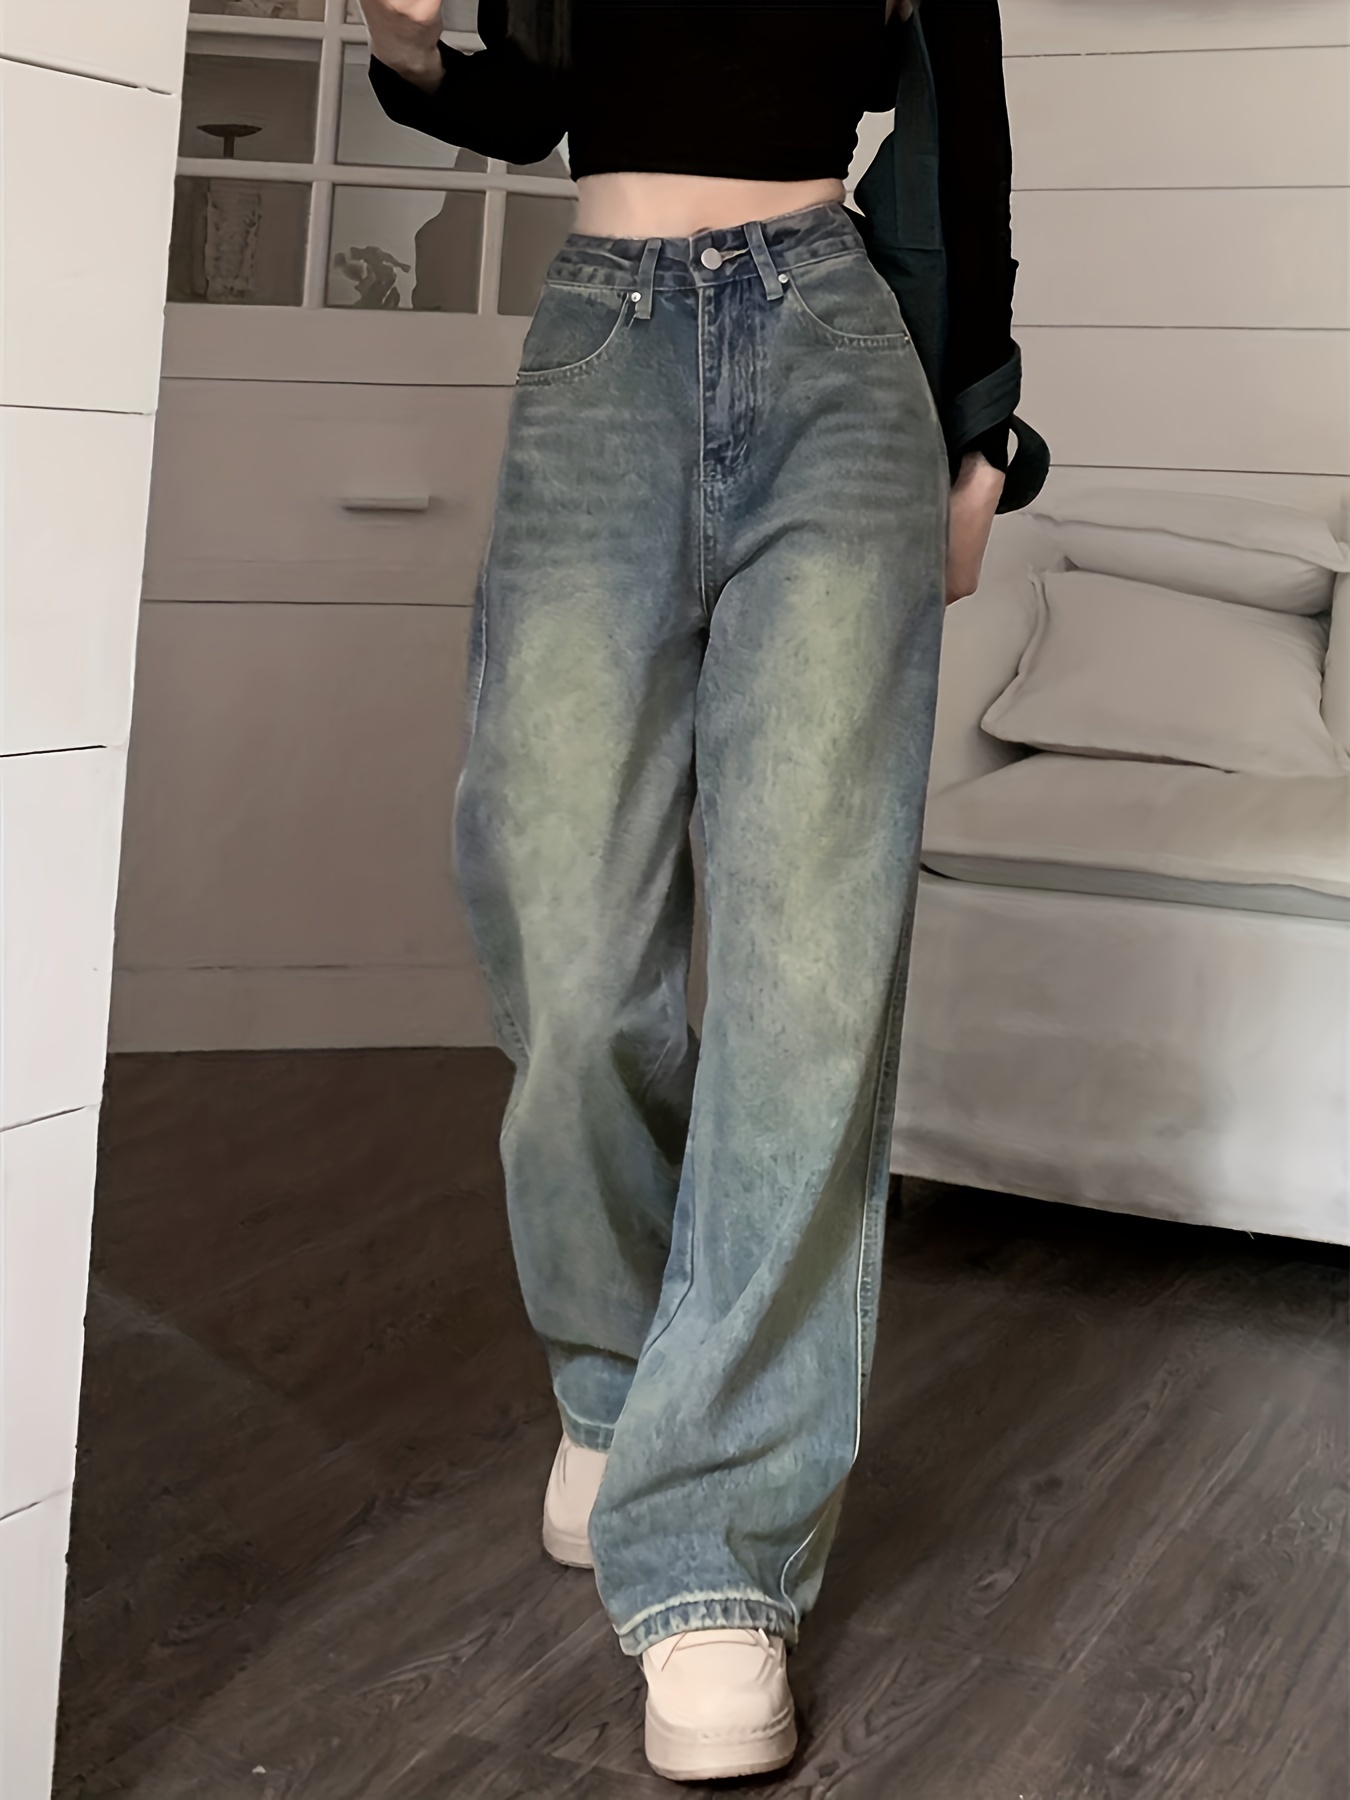 Blue Loose Fit Baggy Jeans, Straight Legs Washed Wide Legs Jeans, Women's  Denim Jeans & Clothing